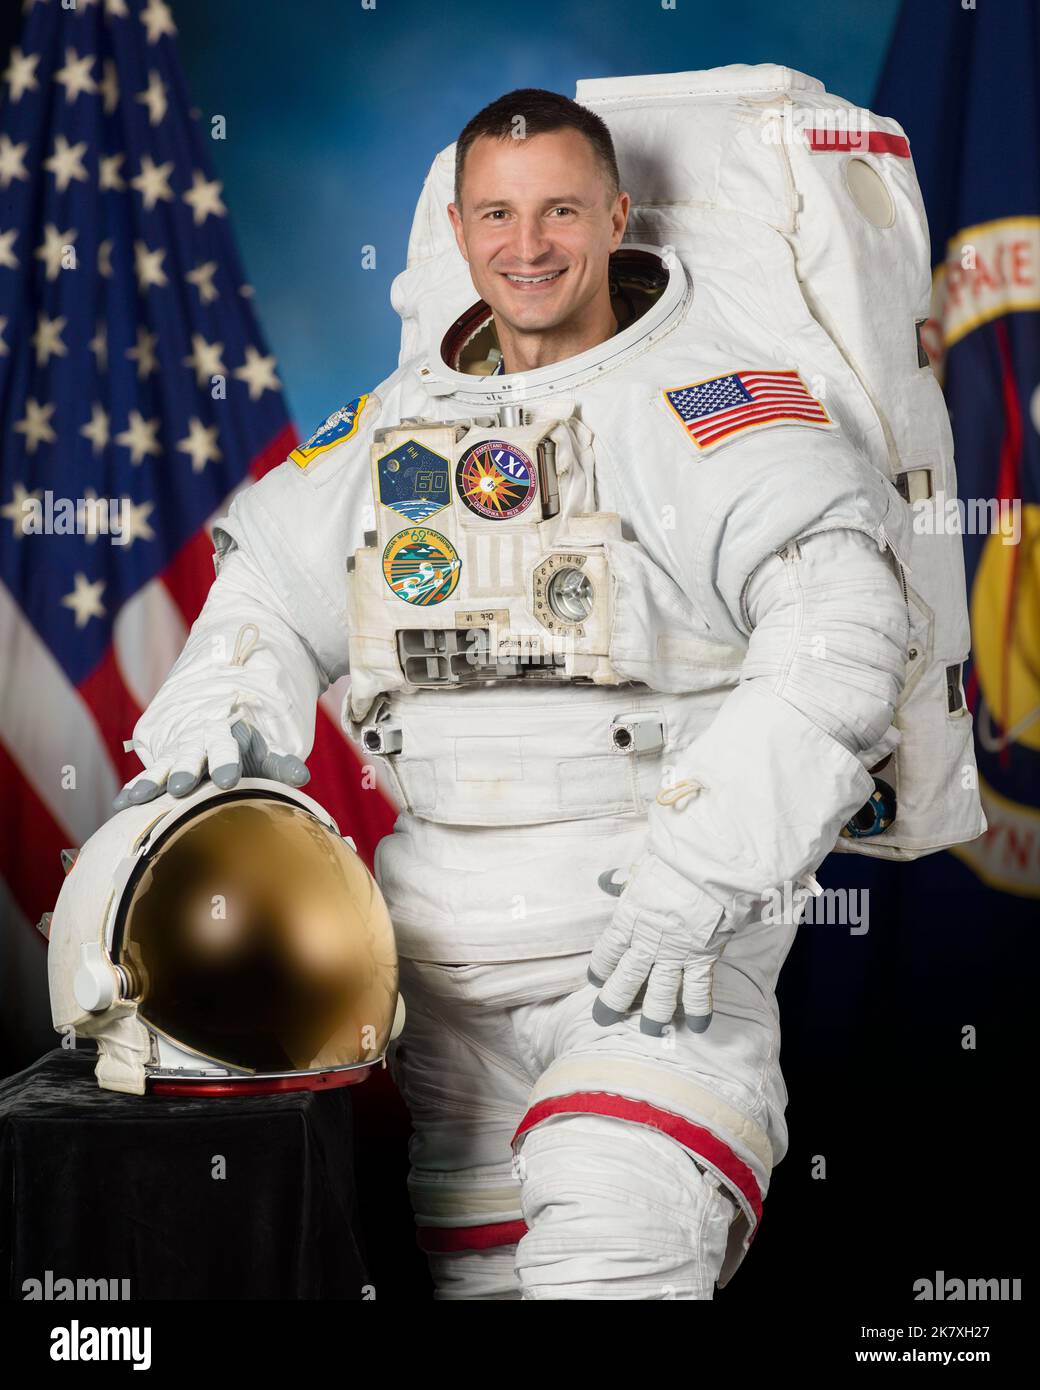 Official portrait of NASA astronaut Andrew Morgan in a U.S. spacesuit, also known as an Extravehicular Mobility Unit (EMU). Official NASA Astronaut Portrait in EMU - Expedition 57/58 Crew Member Drew Morgan Stock Photo